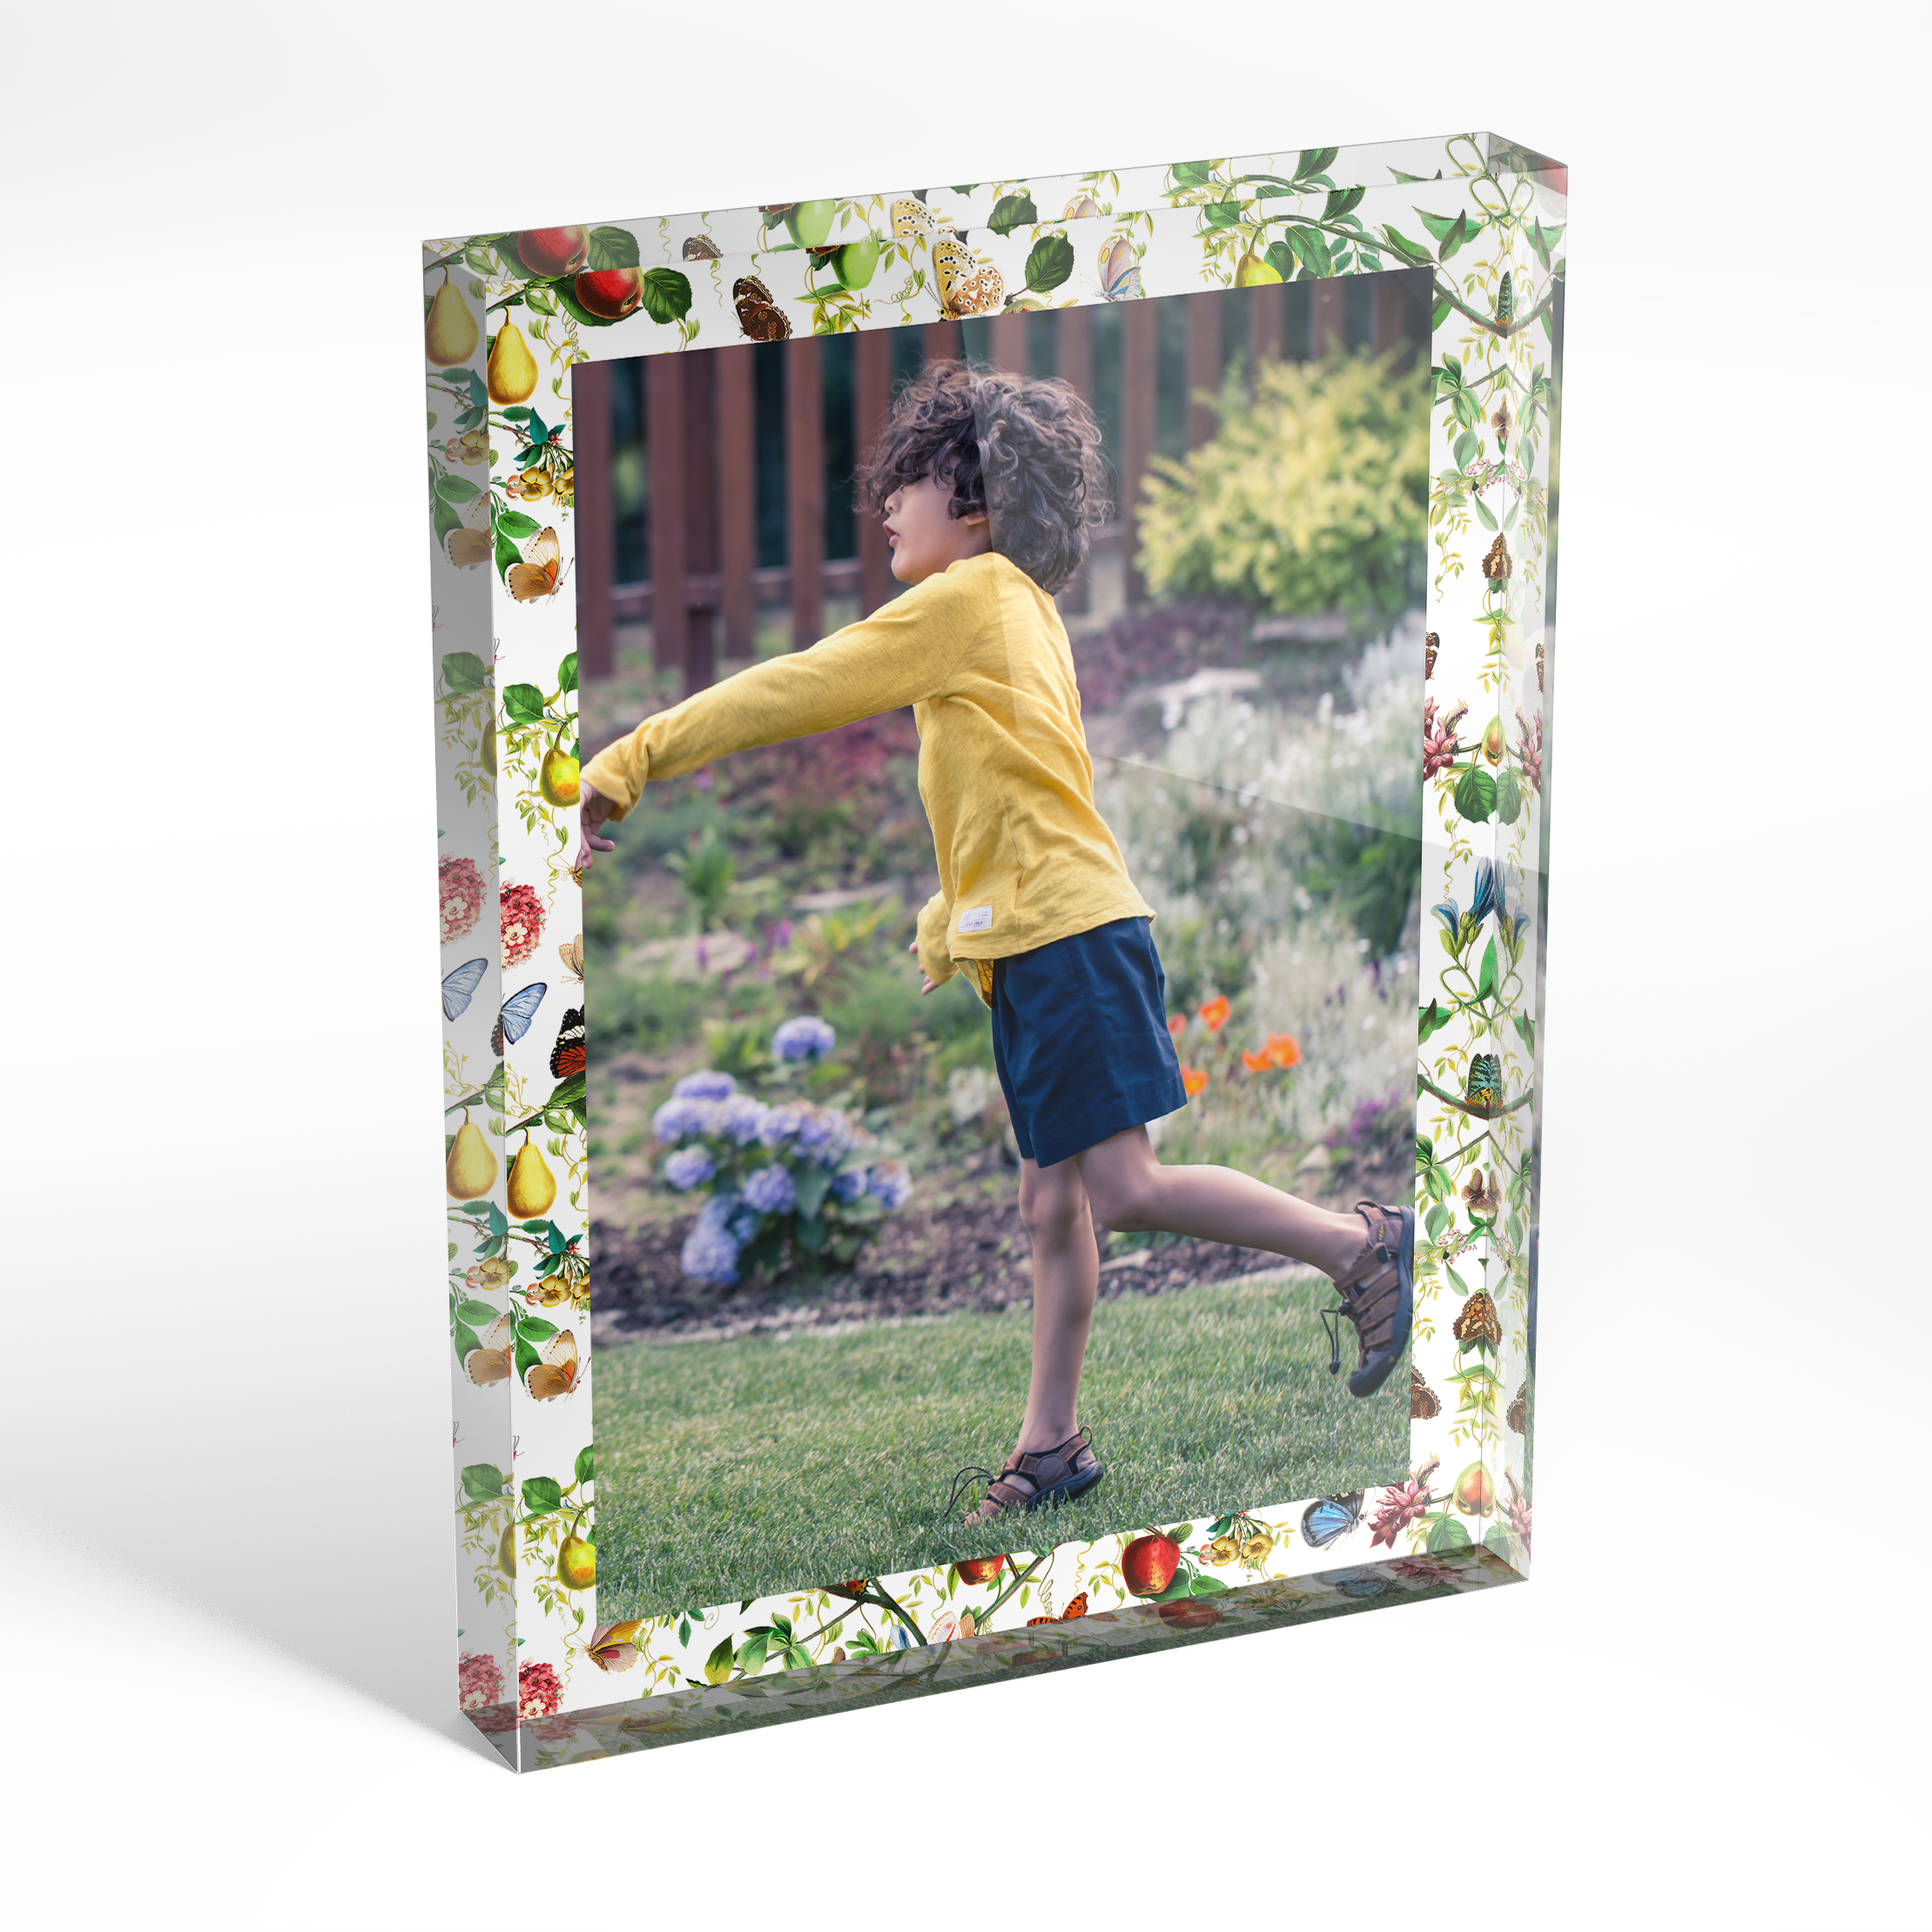 An angled side view of a portrait layout Acrylic Photo Block with space for 1 photo. Thiis design is named "Timeless Treasure". 